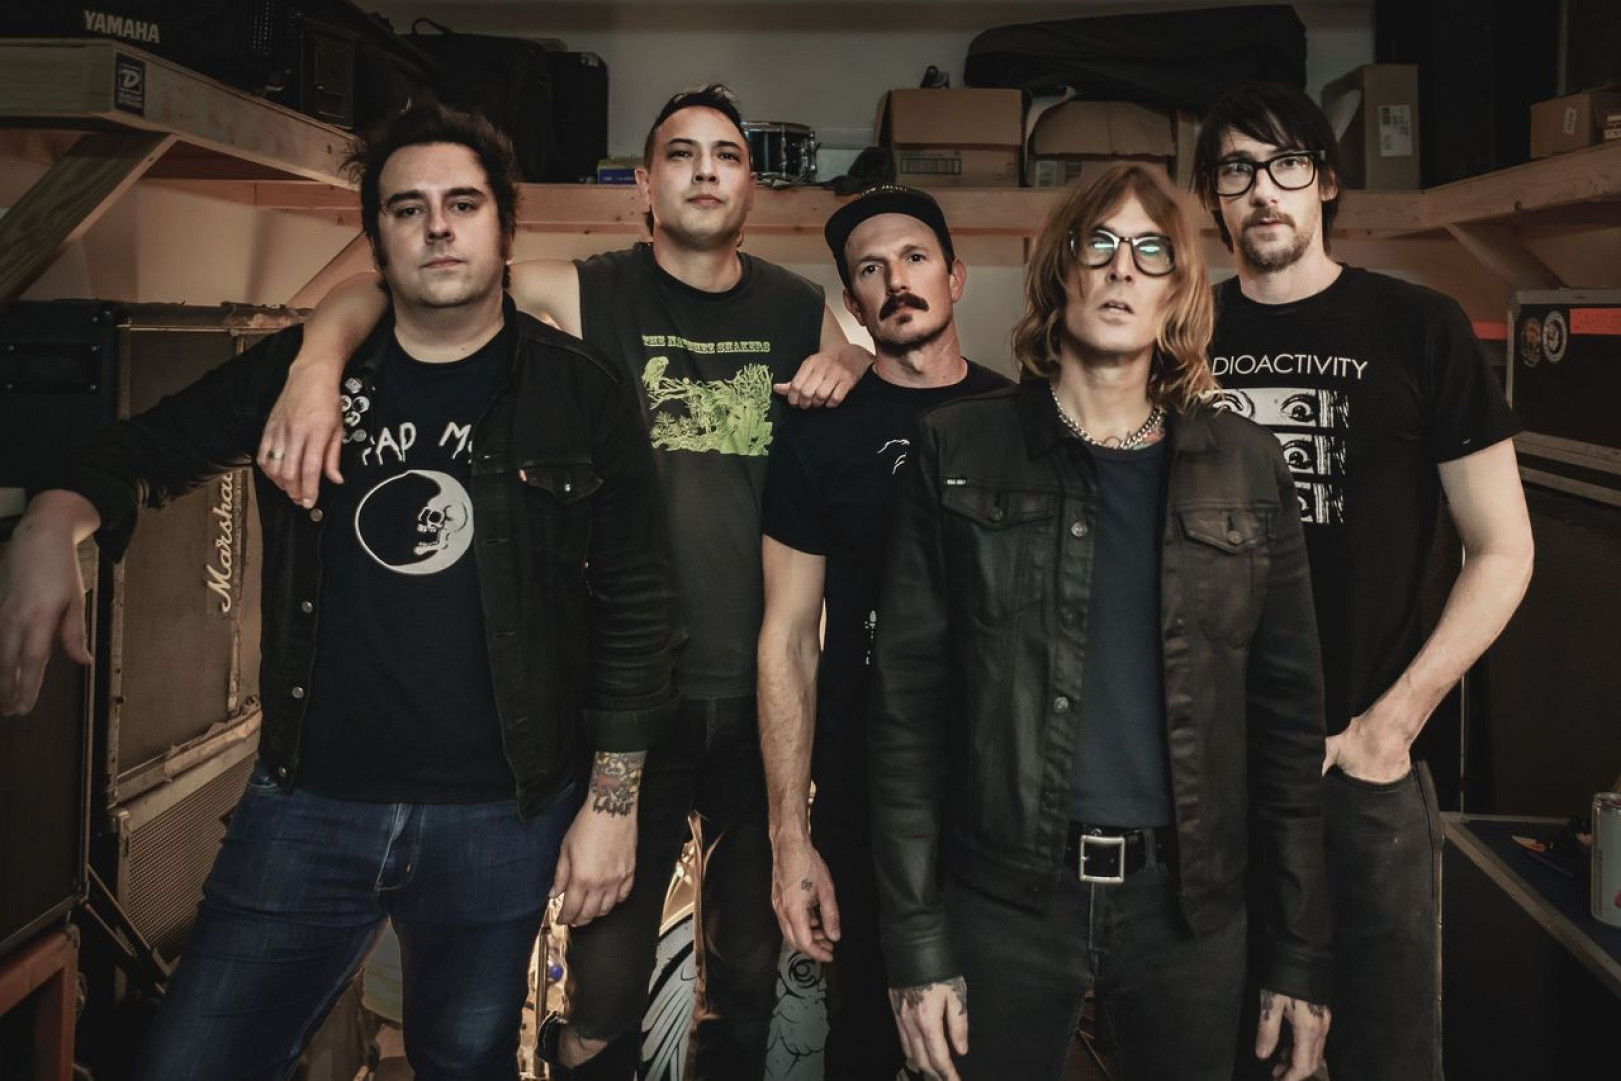 Check out the new track by the Riverboat Gamblers!